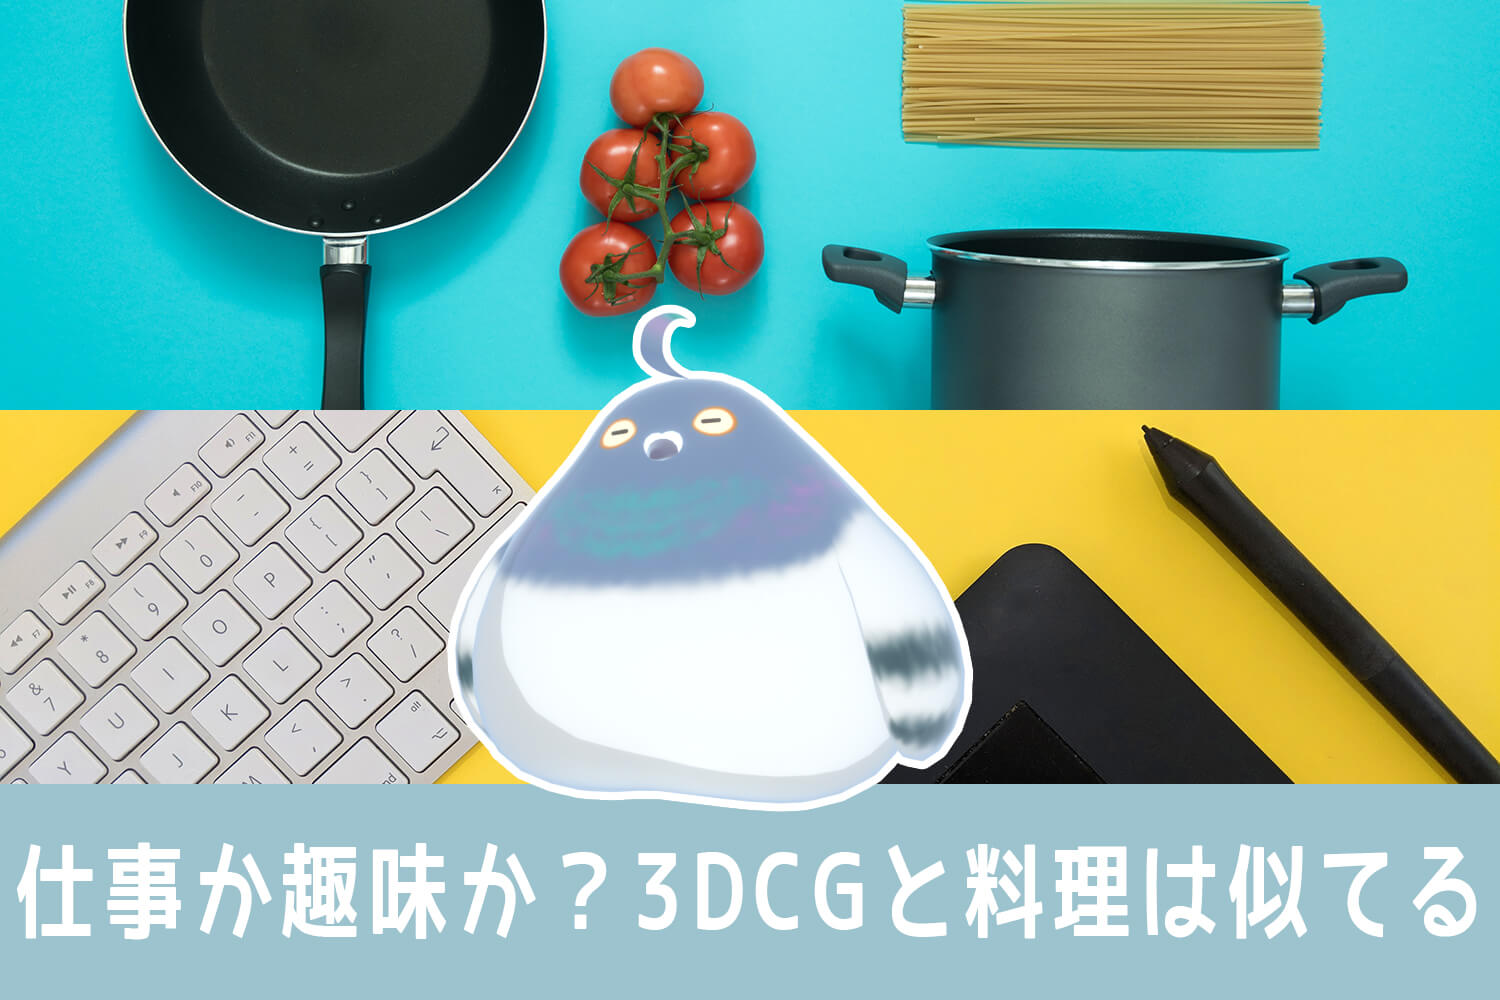 Work or Hobby? - 3DCG And Cooking Are A Bit Similar